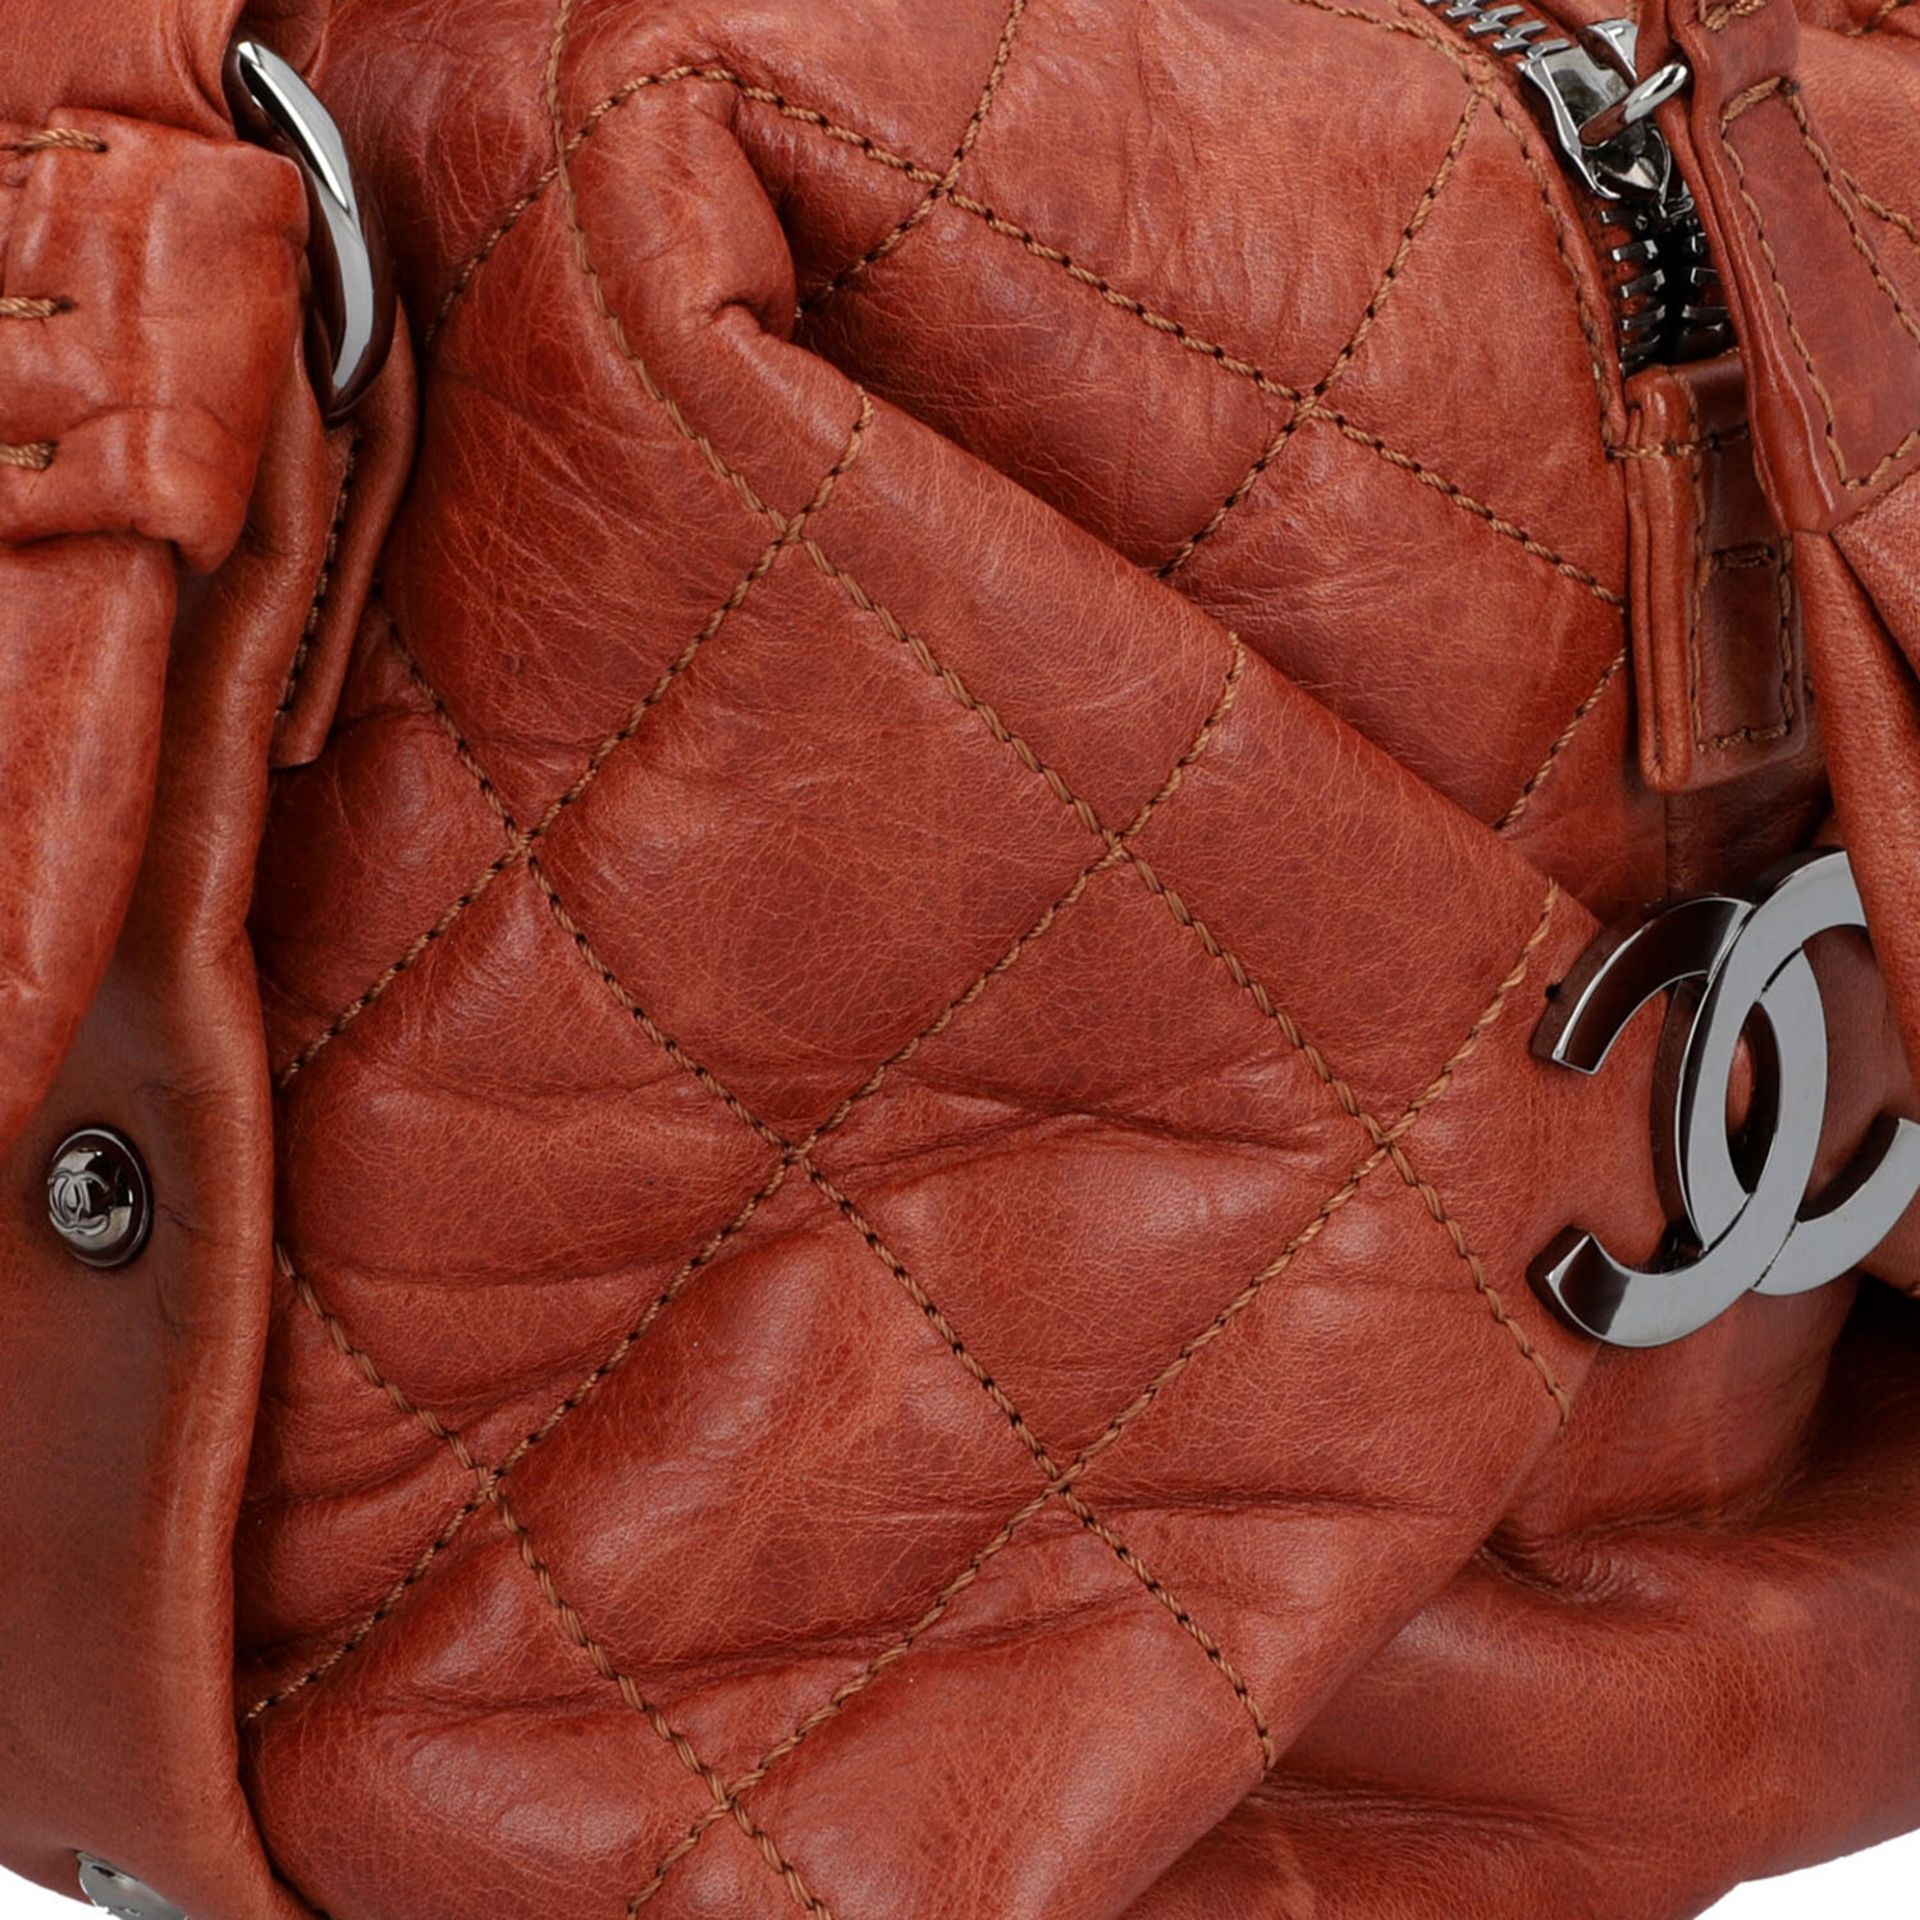 CHANEL Schultertasche, Koll. 2005/2006. - Image 7 of 9